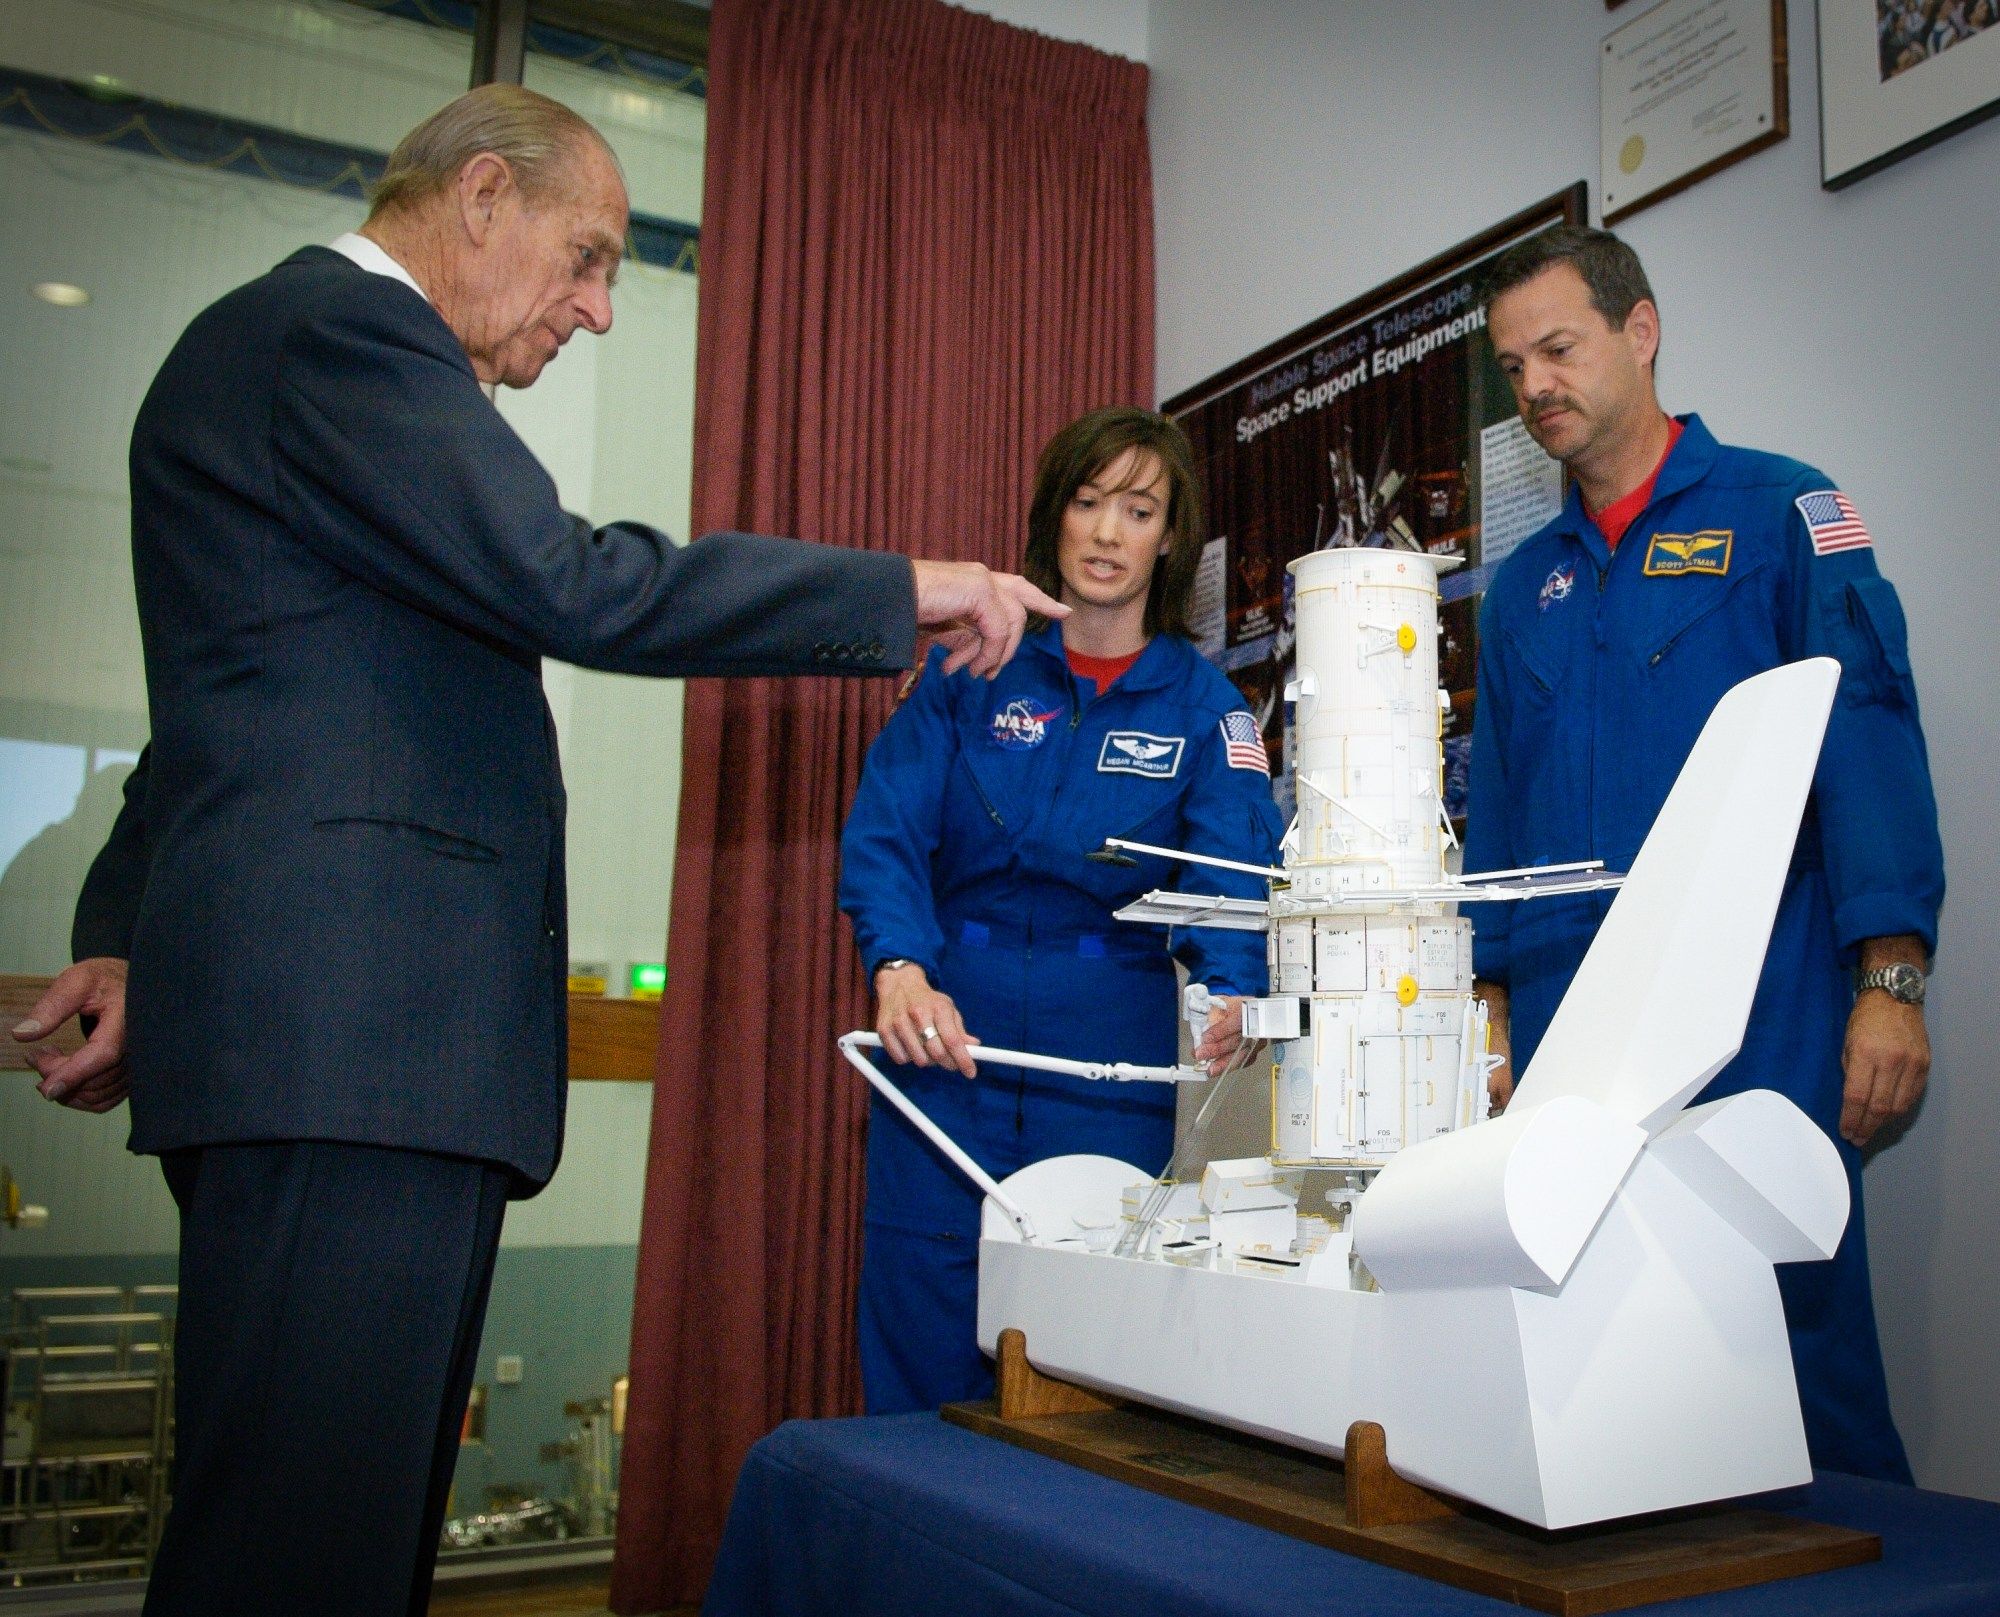 Two astronauts in blue uniforms stand behind a simple model of the space shuttle that has a detailed model of the Hubble Space Telescope in its cargo bay. One holds the shuttle's model robotic arm.Prince Phillip stands to the left and points at the Hubble model.